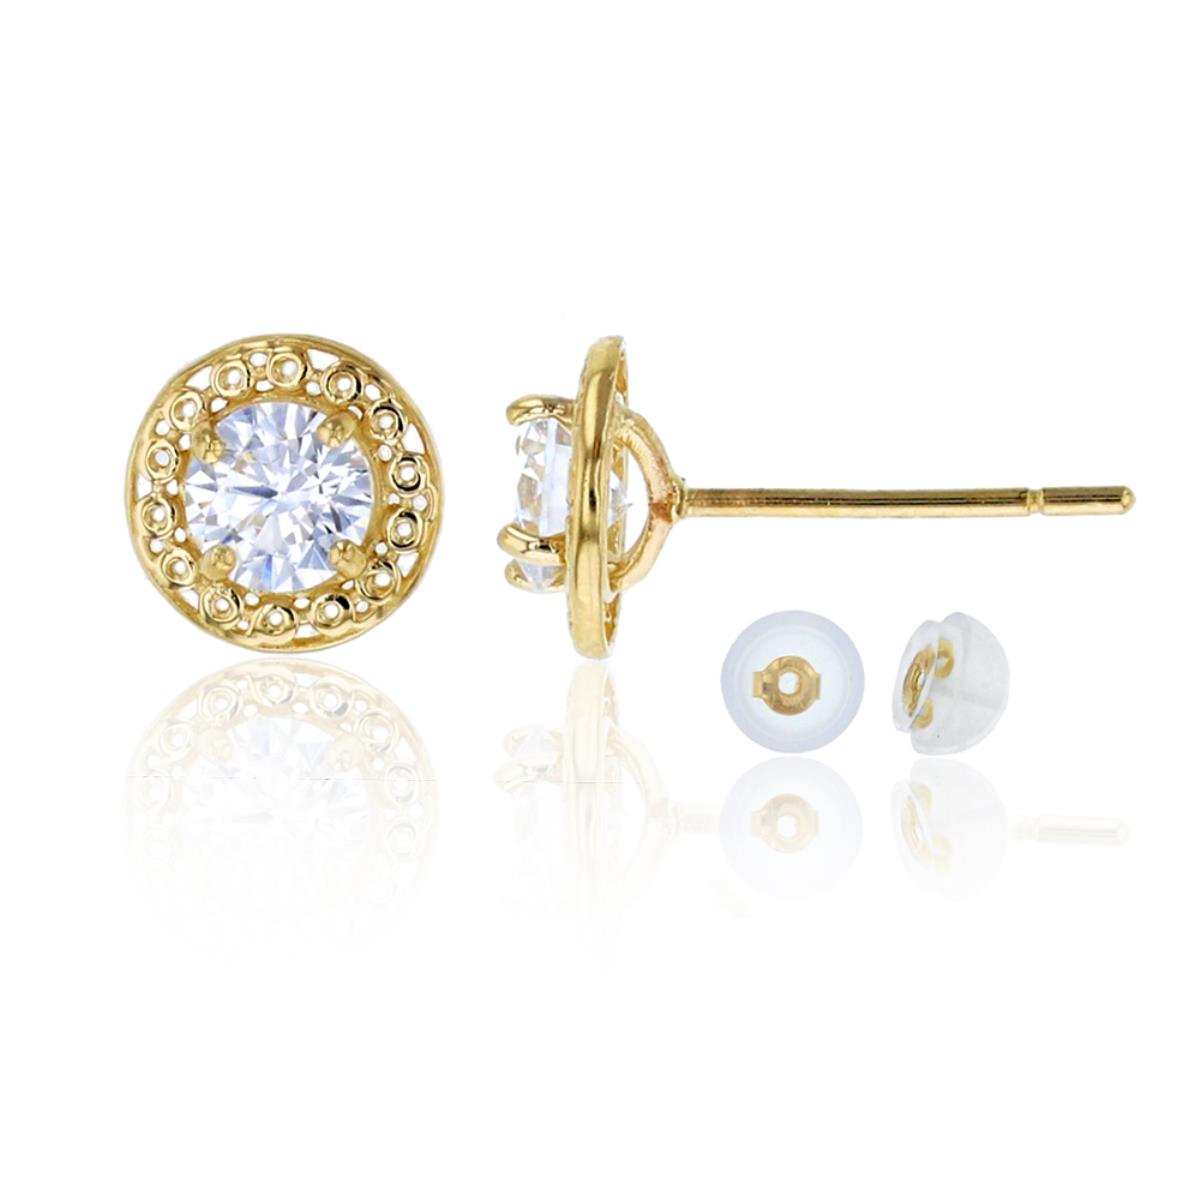 10K Yellow Gold 4mm Round Cut CZ Filigree Stud Earring & 10K Silicone Back